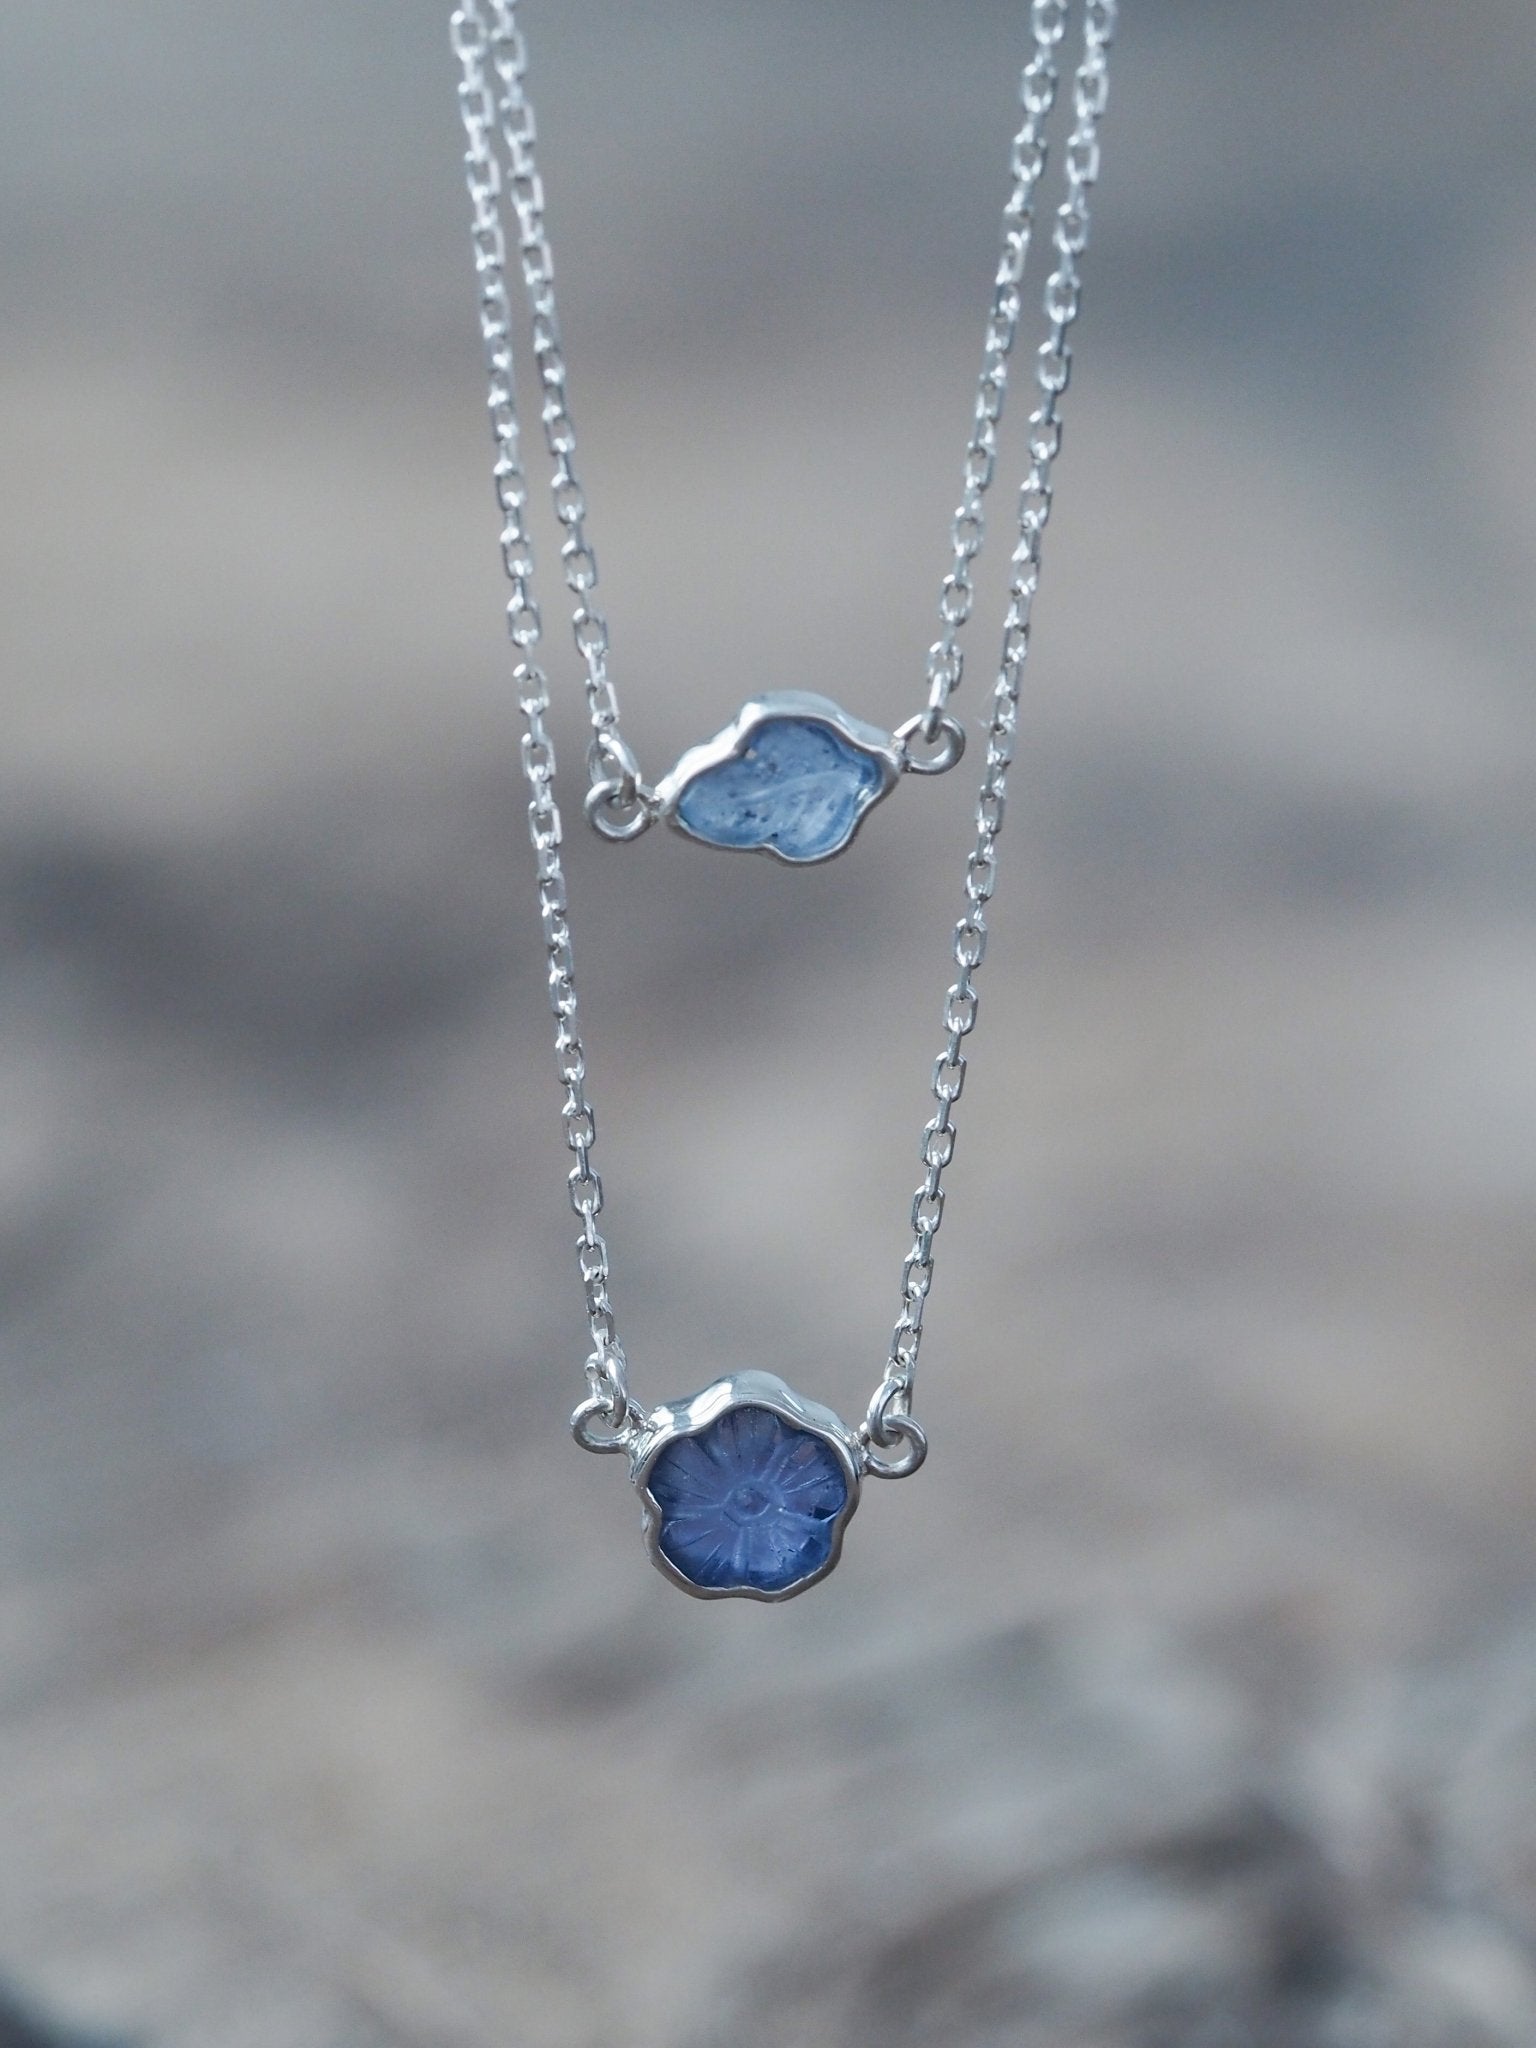 Sapphire necklace reduced price - jewelry - by owner - sale